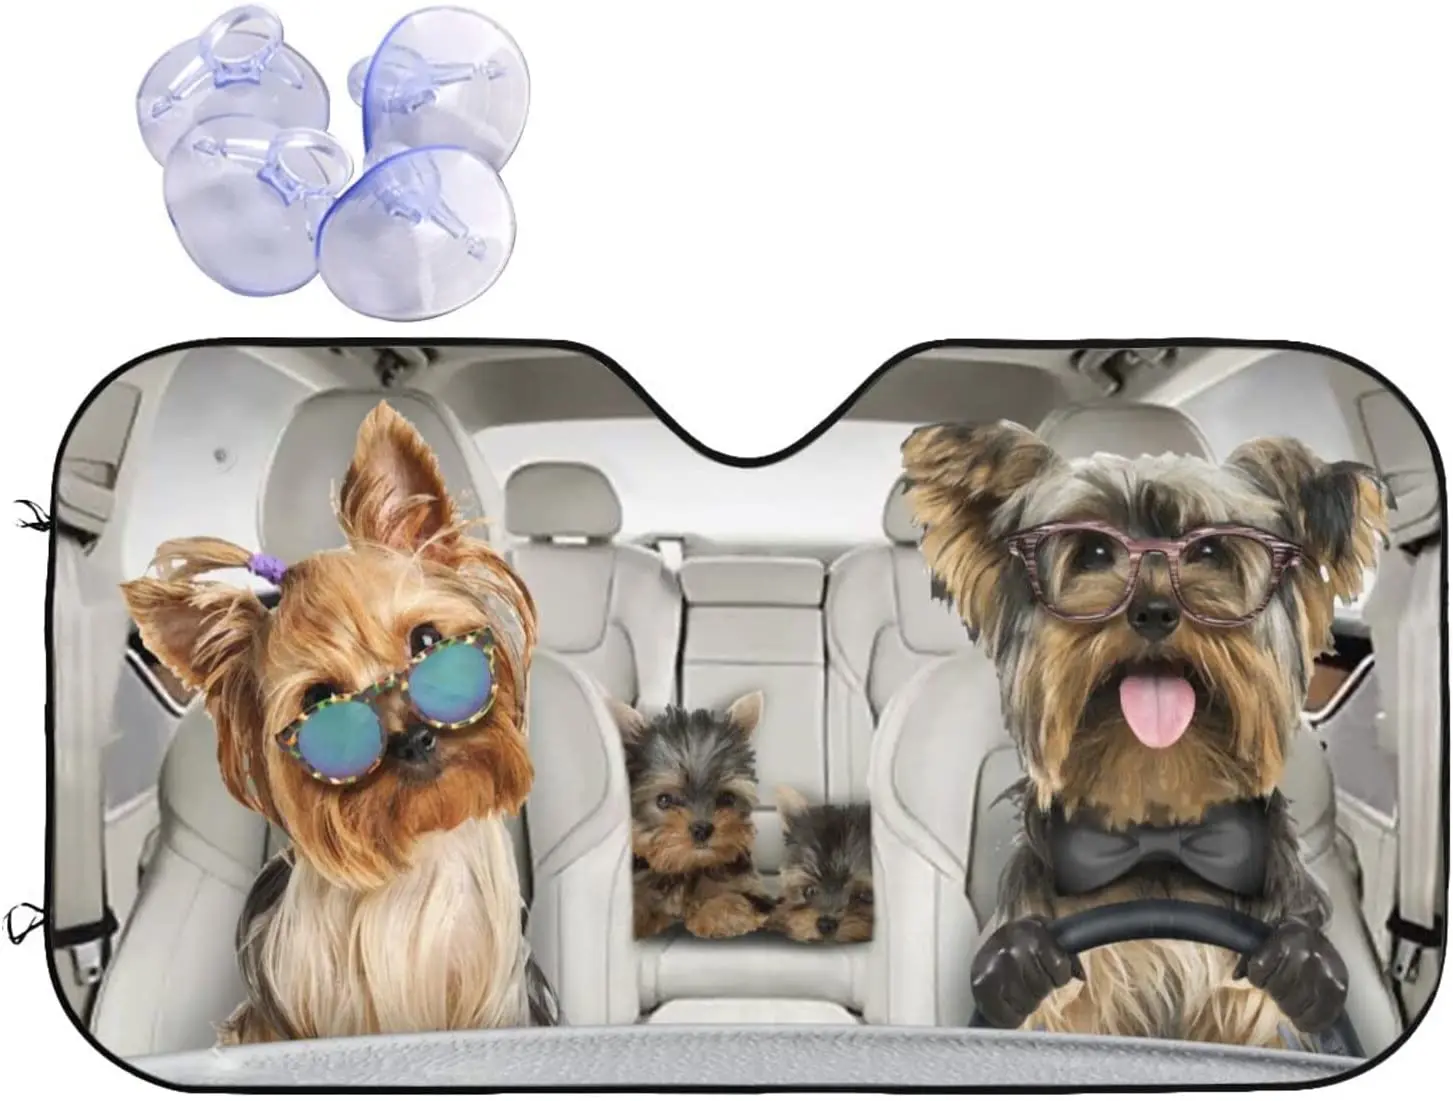 Windshield Car Sunshade Funny Terriers Dog Driver Windshield Sun Shade Window Covers for Cars Folding Block UV Rays 51x27.5 in